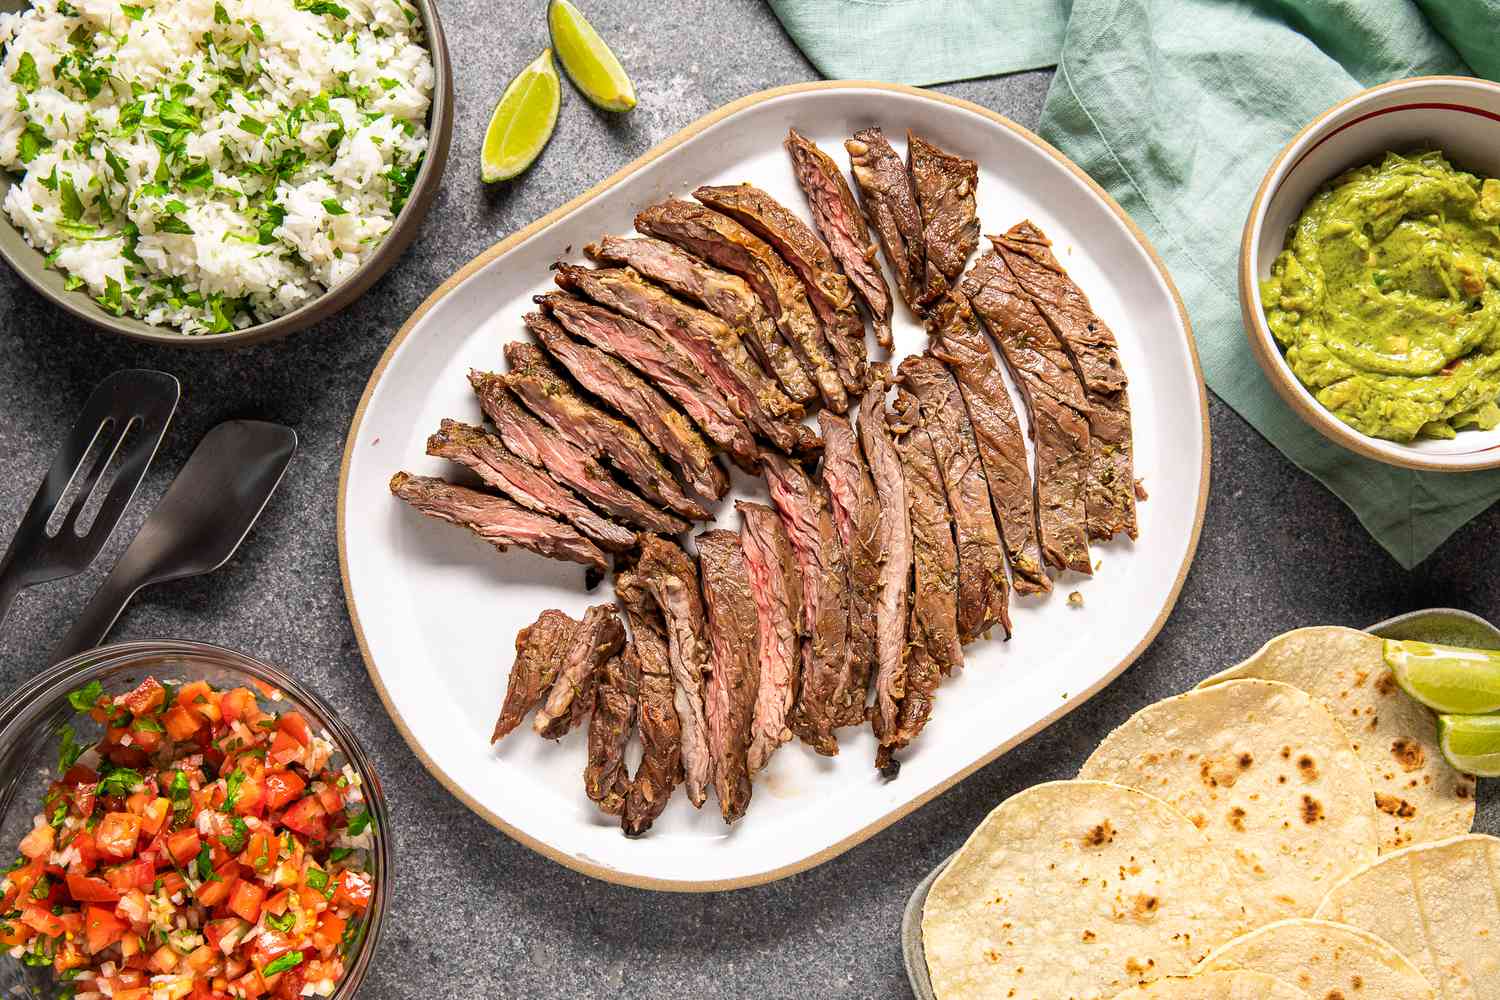 Arrachera (Mexican Skirt Steak) on a Platter Next to a Bowl of Salsa, a Bowl of Cilantro Rice, a Bowl of Guacamole, a Platter of Tortillas, and Lime Wedges and a Light Teal Kitchen Towel on the Counter